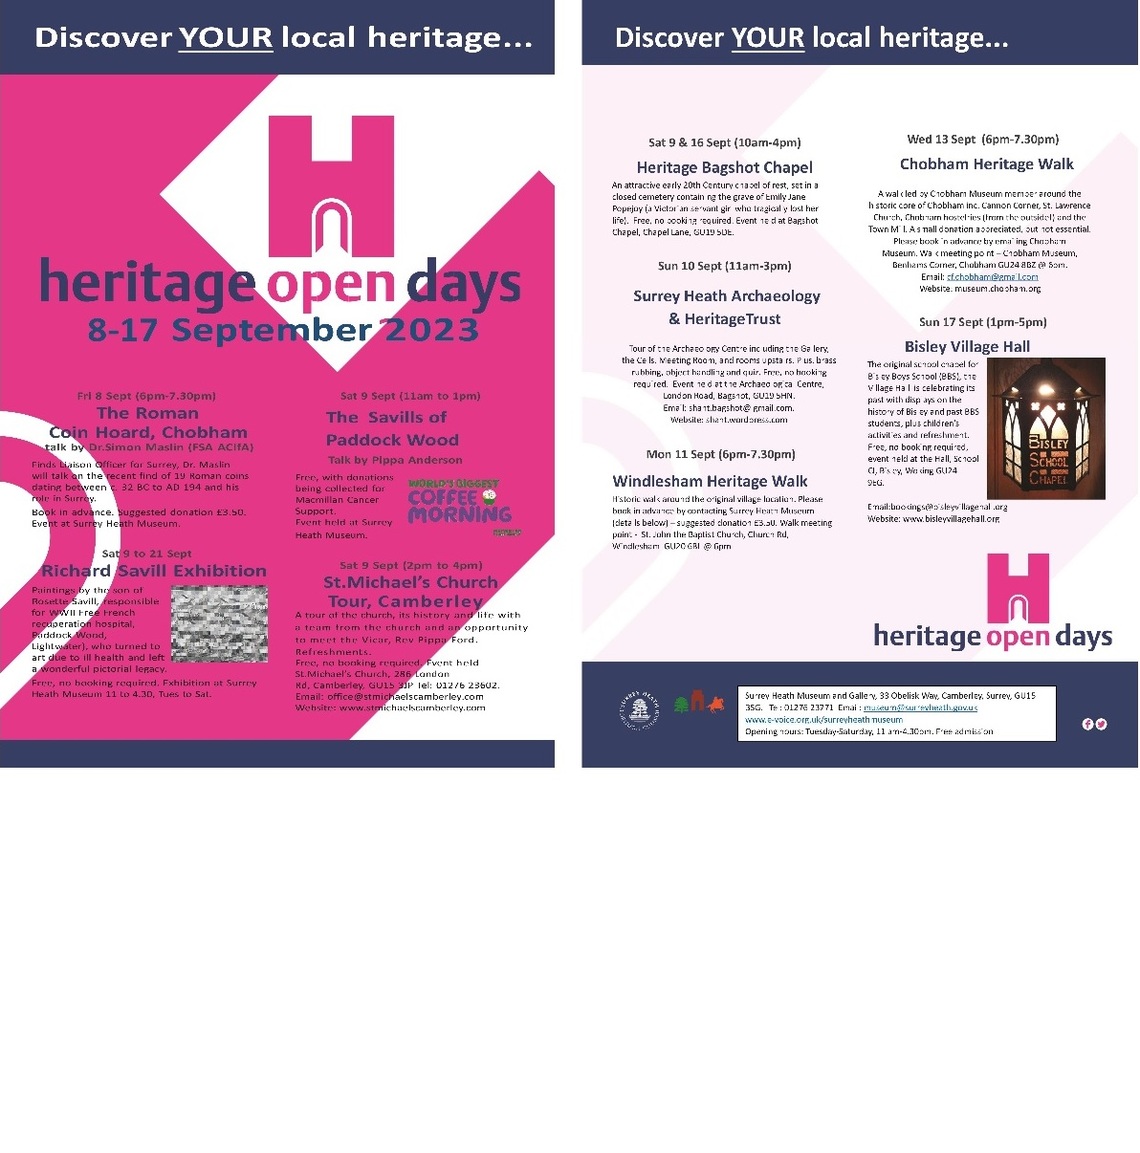 Flyer featuring all the Heritage Open Days events for 2023